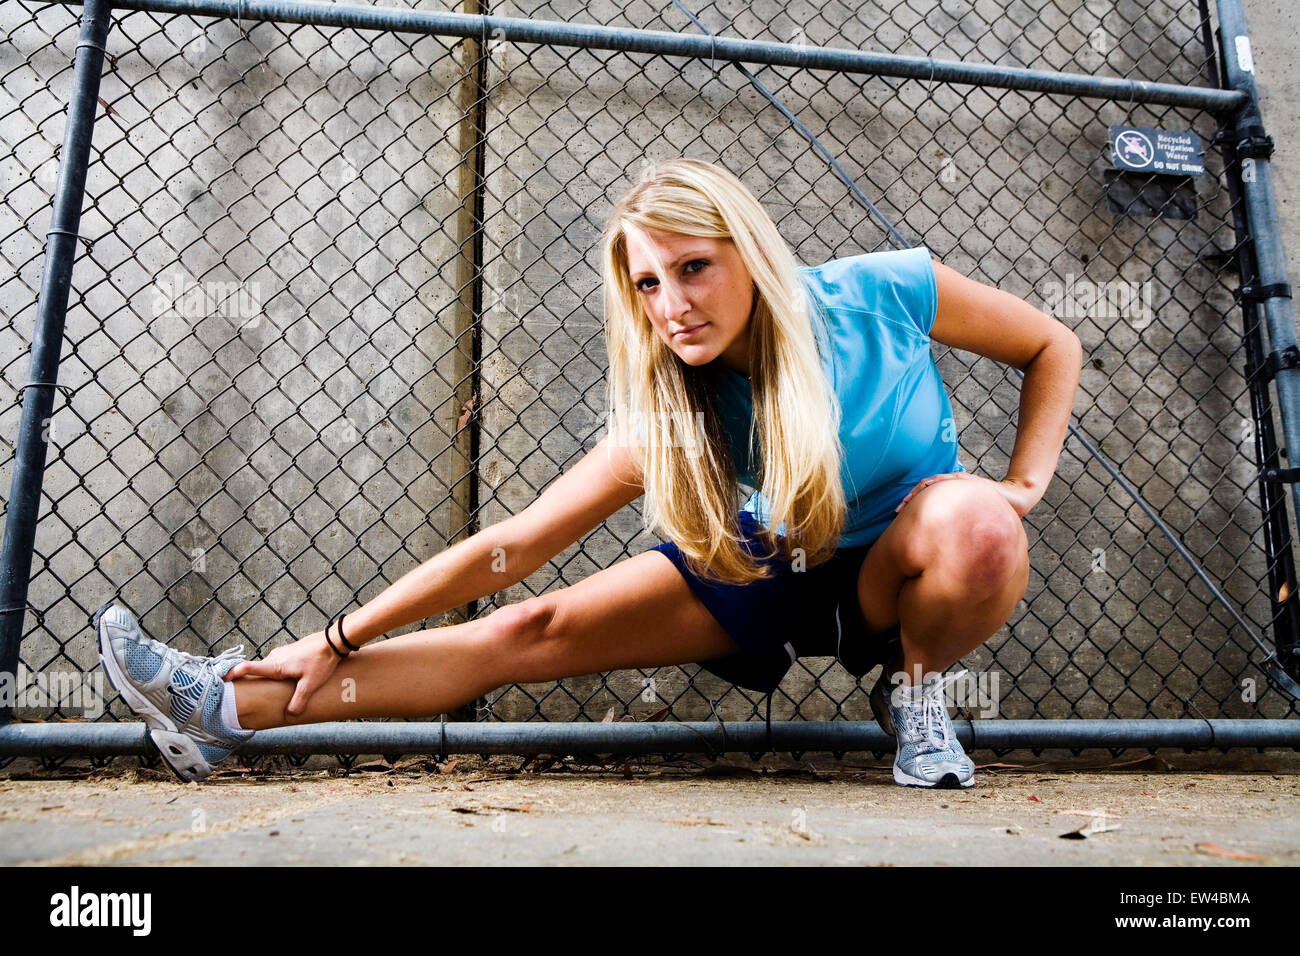 Blond woman stretches and prepares for a run San Diego California. Stock Photo